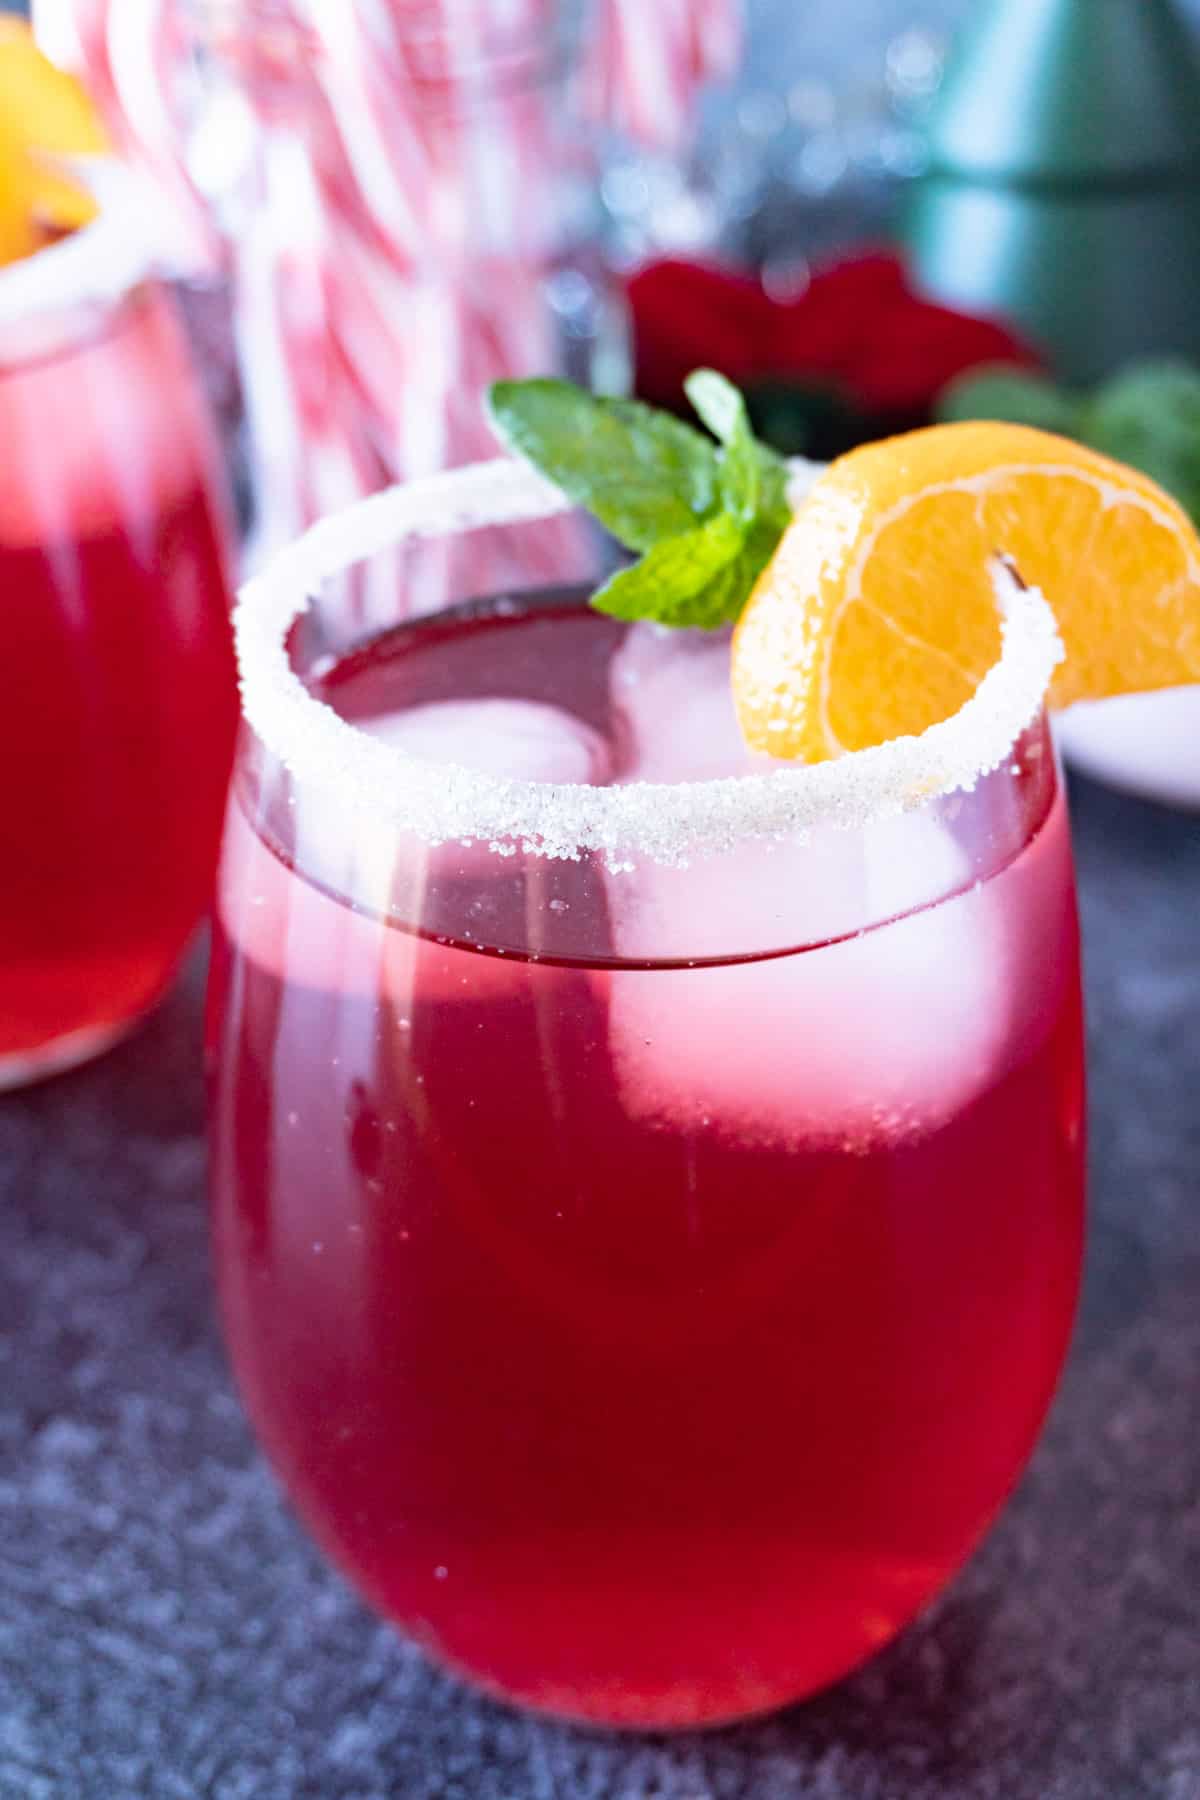 Cranberry julep in glass with sugared rim